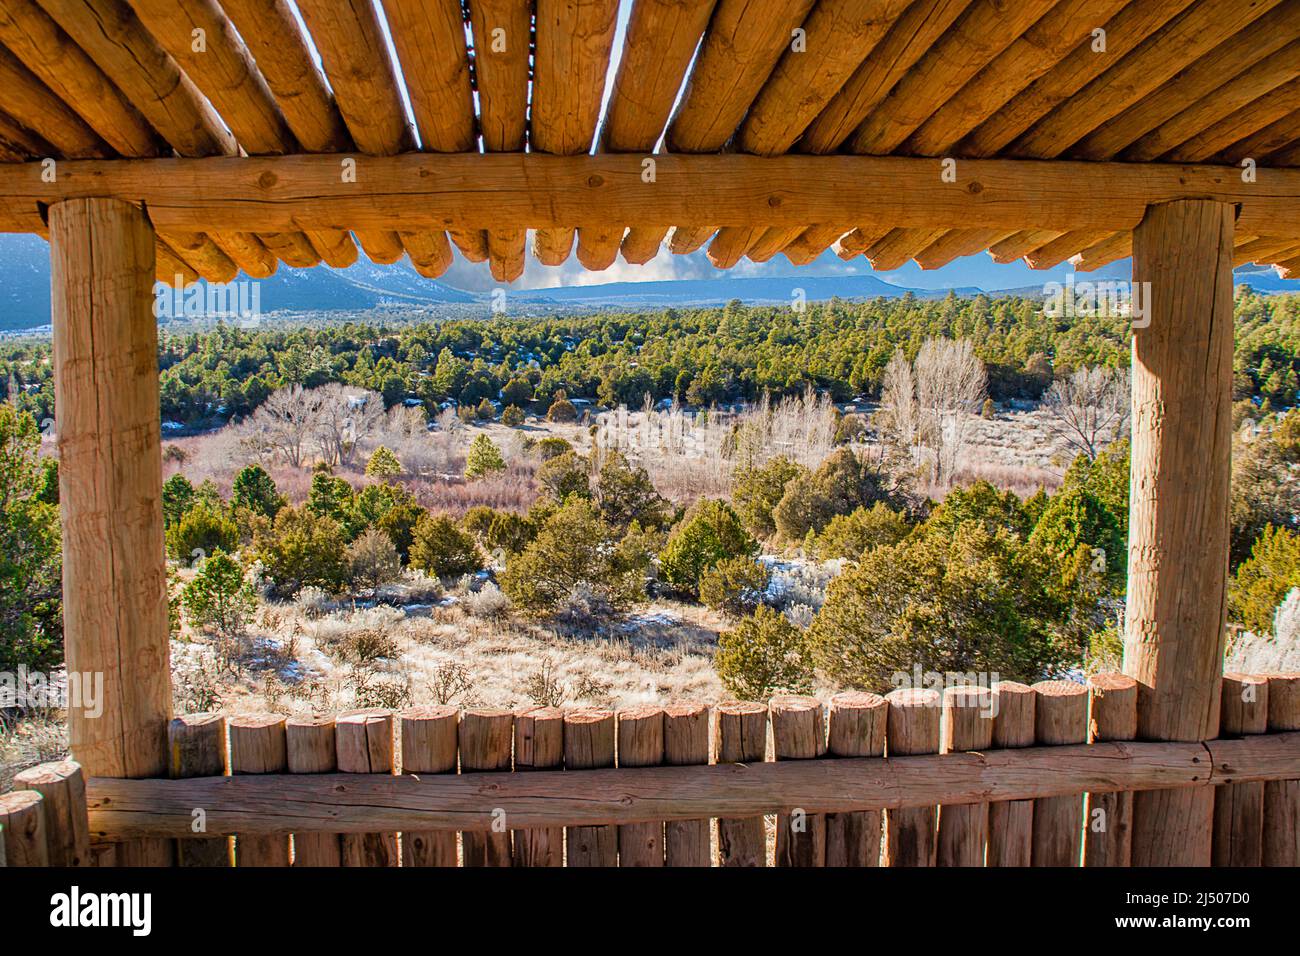 Shelter overlook of the Glorieta Pass at the Pecos National Historical Park in New Mexico. Stock Photo